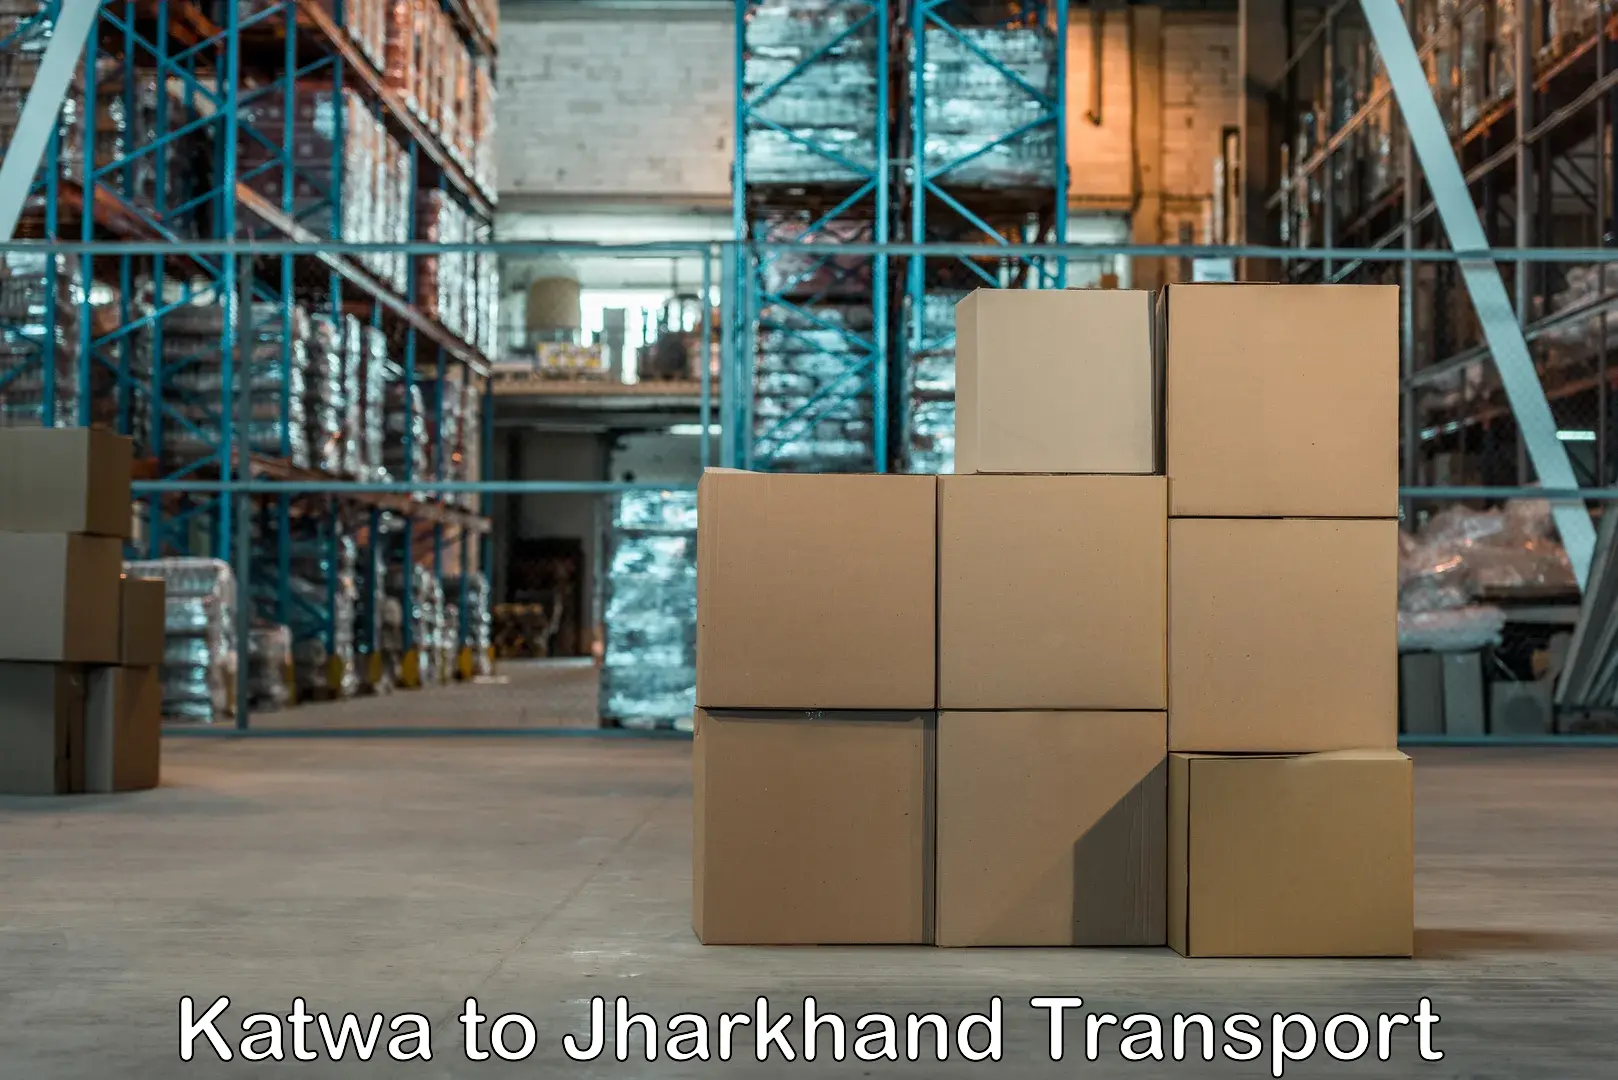 Truck transport companies in India Katwa to Jharkhand